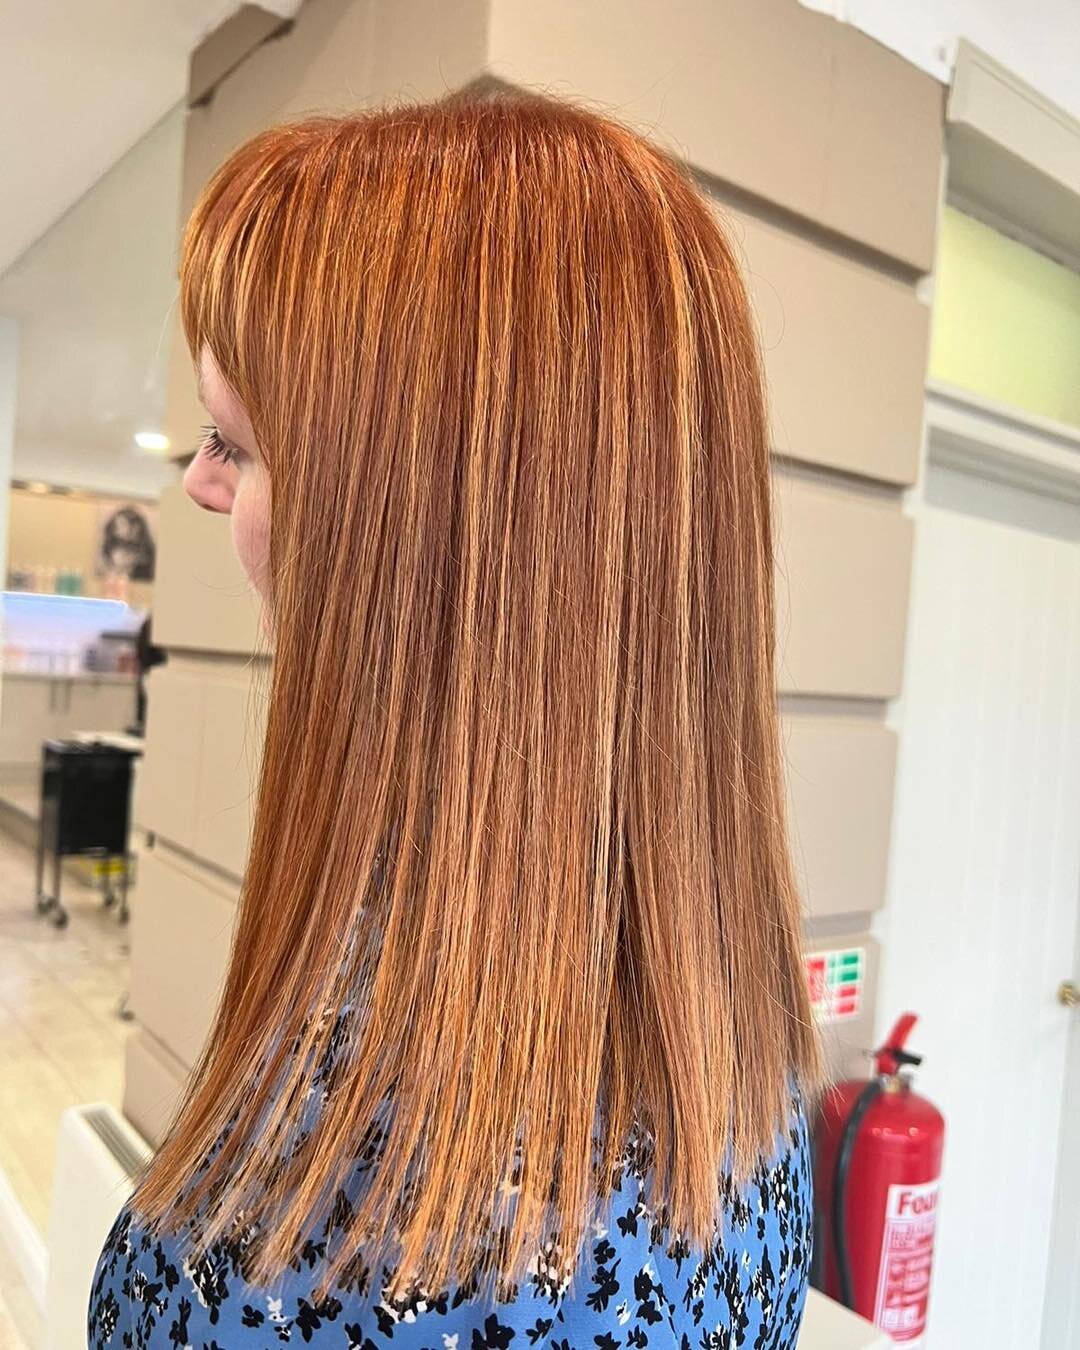 𝐂𝐨𝐩𝐩𝐞𝐫 𝐂𝐫𝐮𝐬𝐡 💥

How nice is this colour by 𝐍𝐢𝐜𝐡𝐨𝐥𝐞? 🧡 It&rsquo;s not all about lived in blondes or brunette balayages.. we love a fiery red head as well!

Click the 𝐁𝐨𝐨𝐤 𝐍𝐨𝐰 button to book your next hair appointment 

#ashl